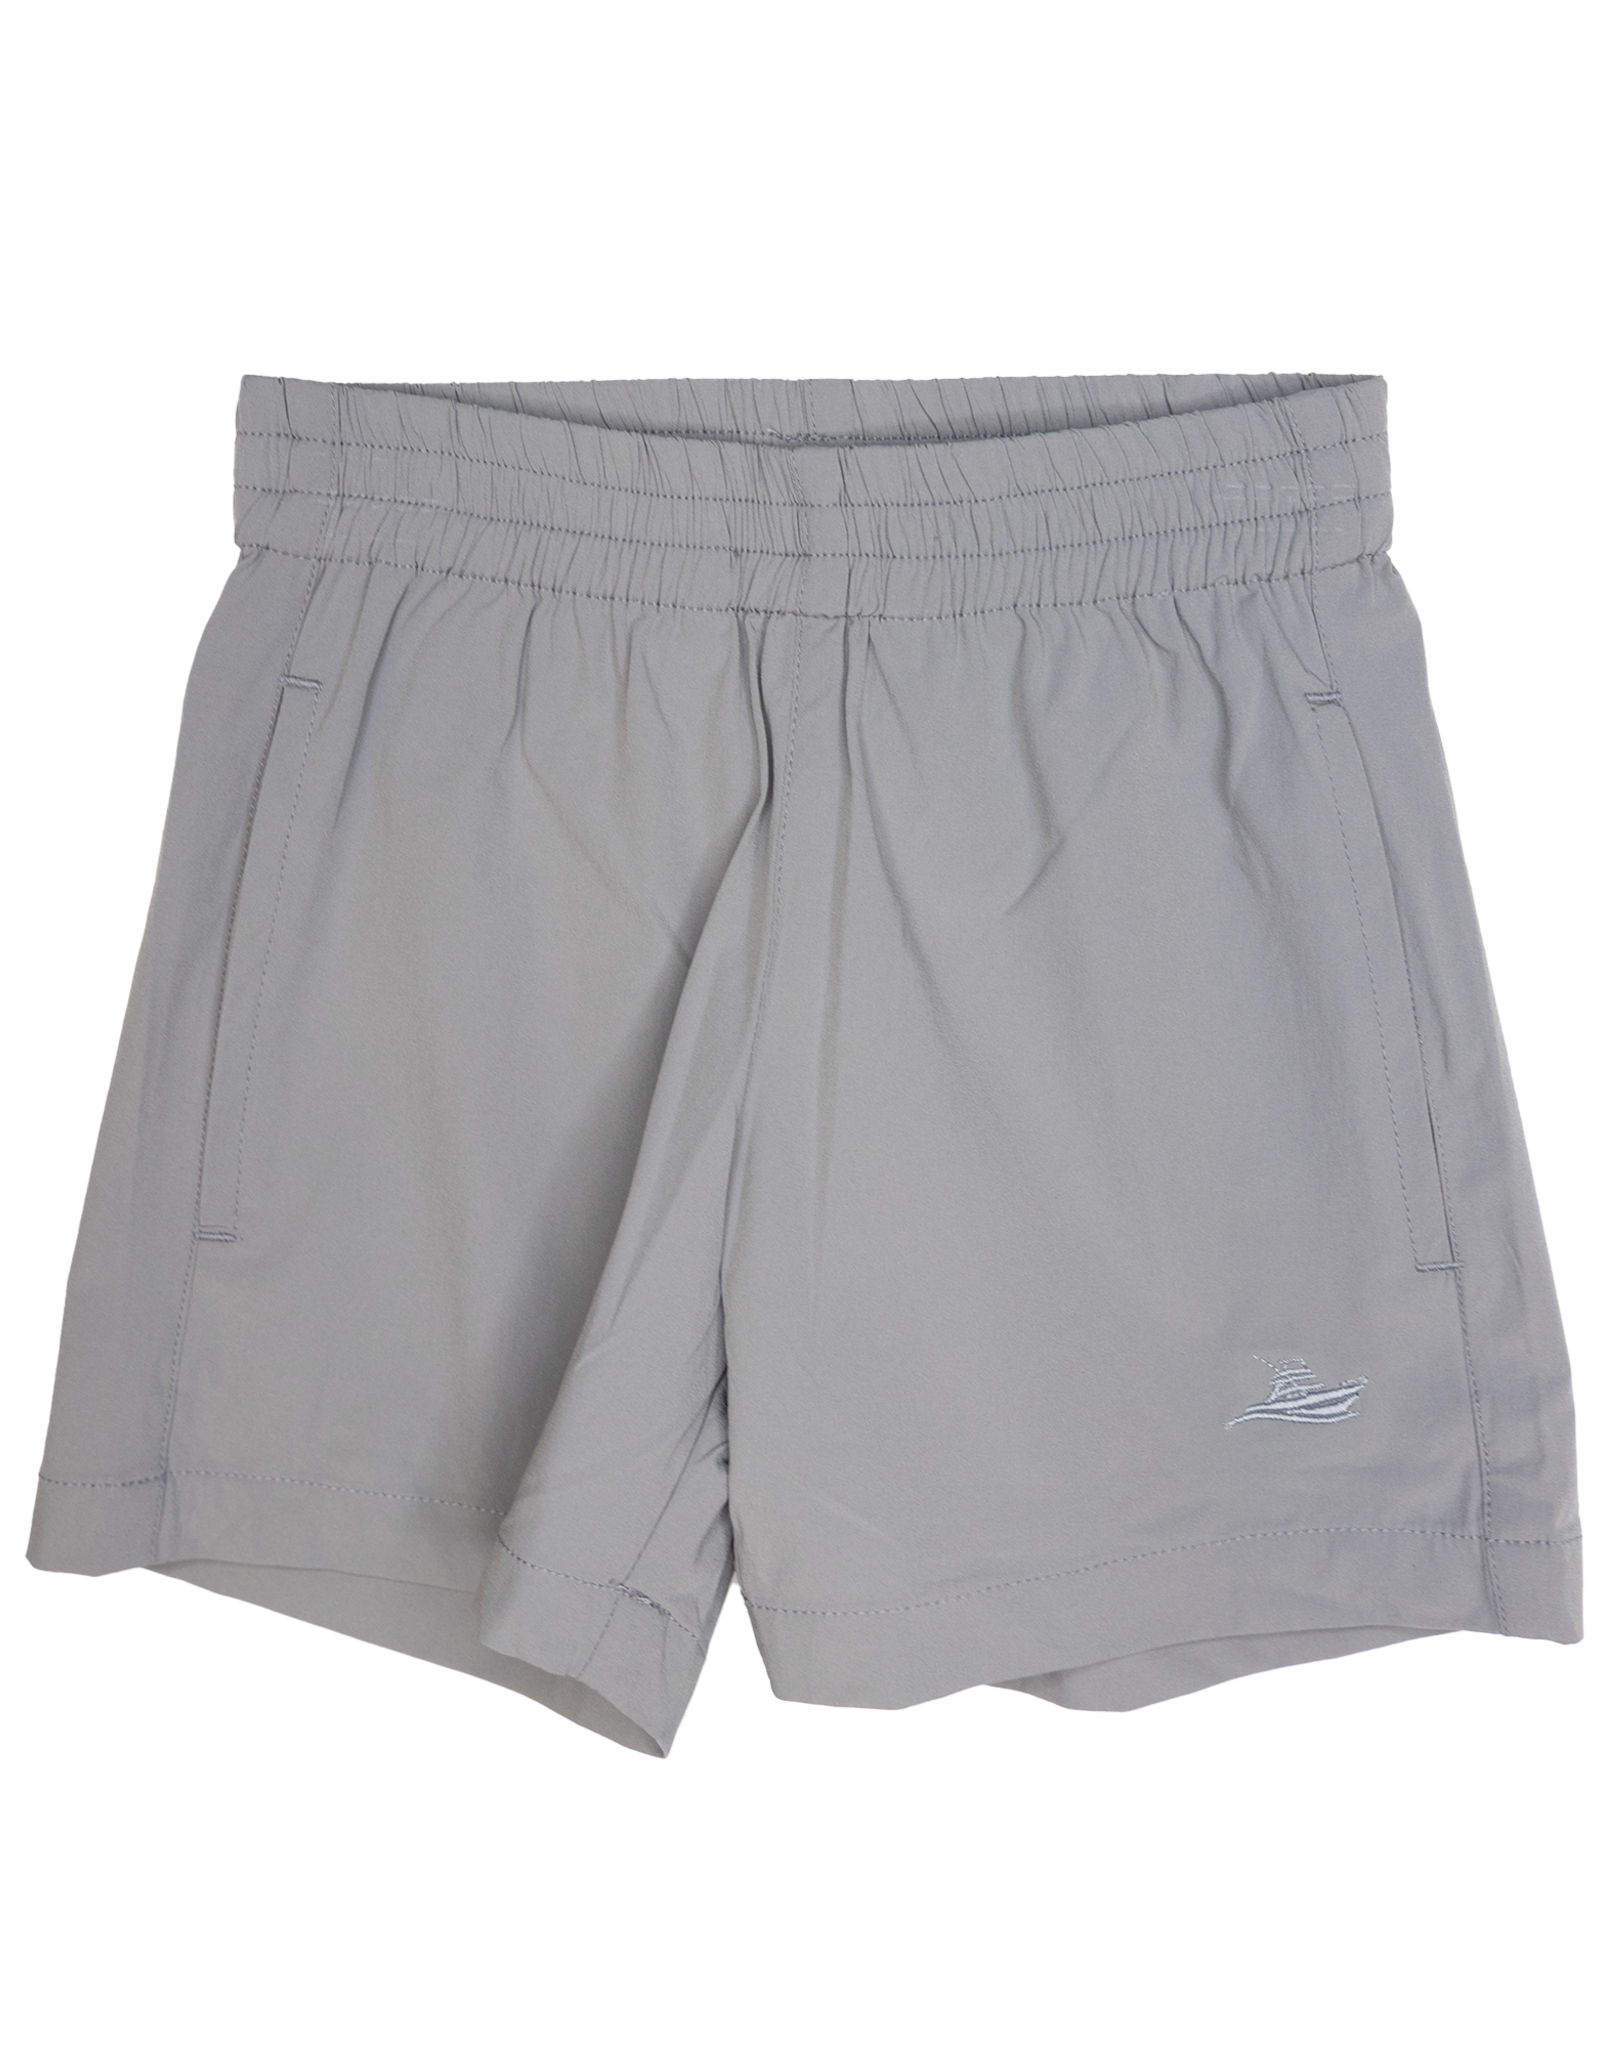 South Bound 3322 Performance Play Short Gray